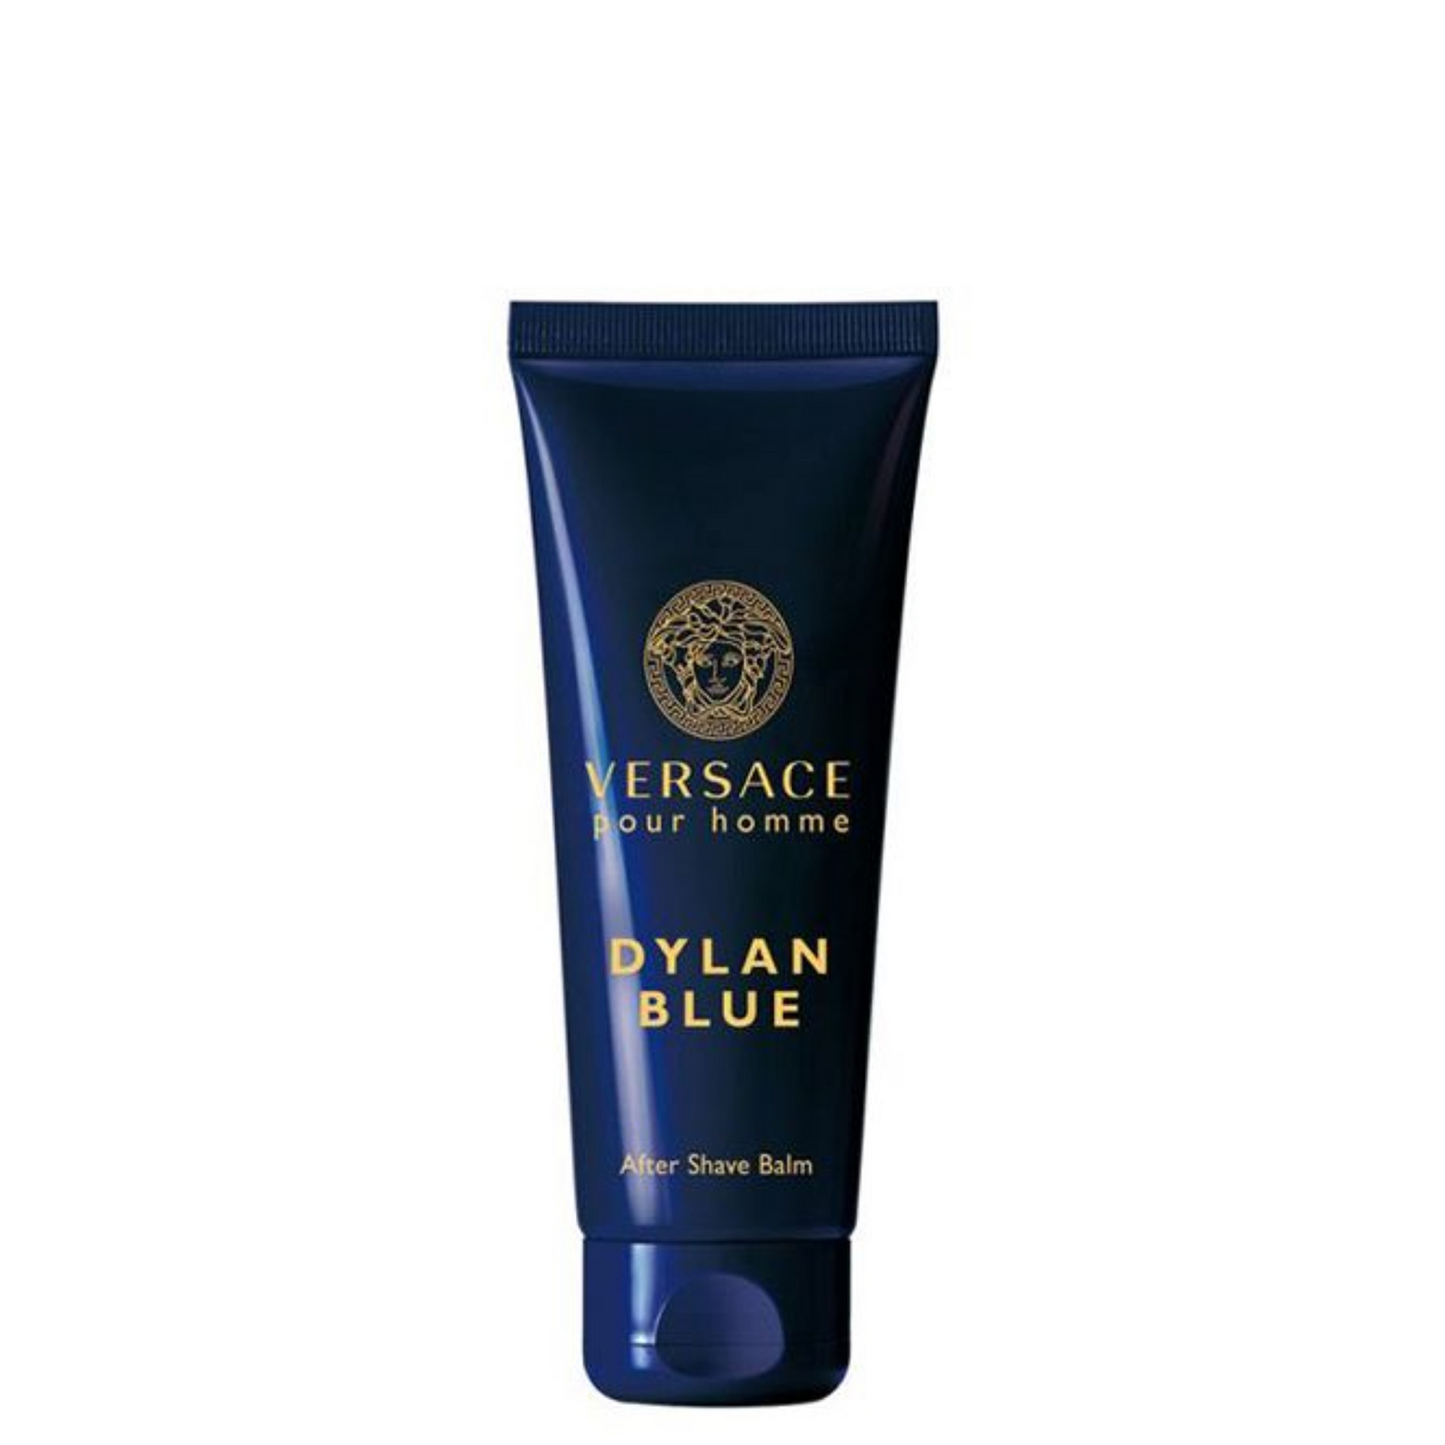 VERSACE DYLAN BLUE AFTER SHAVE BALM